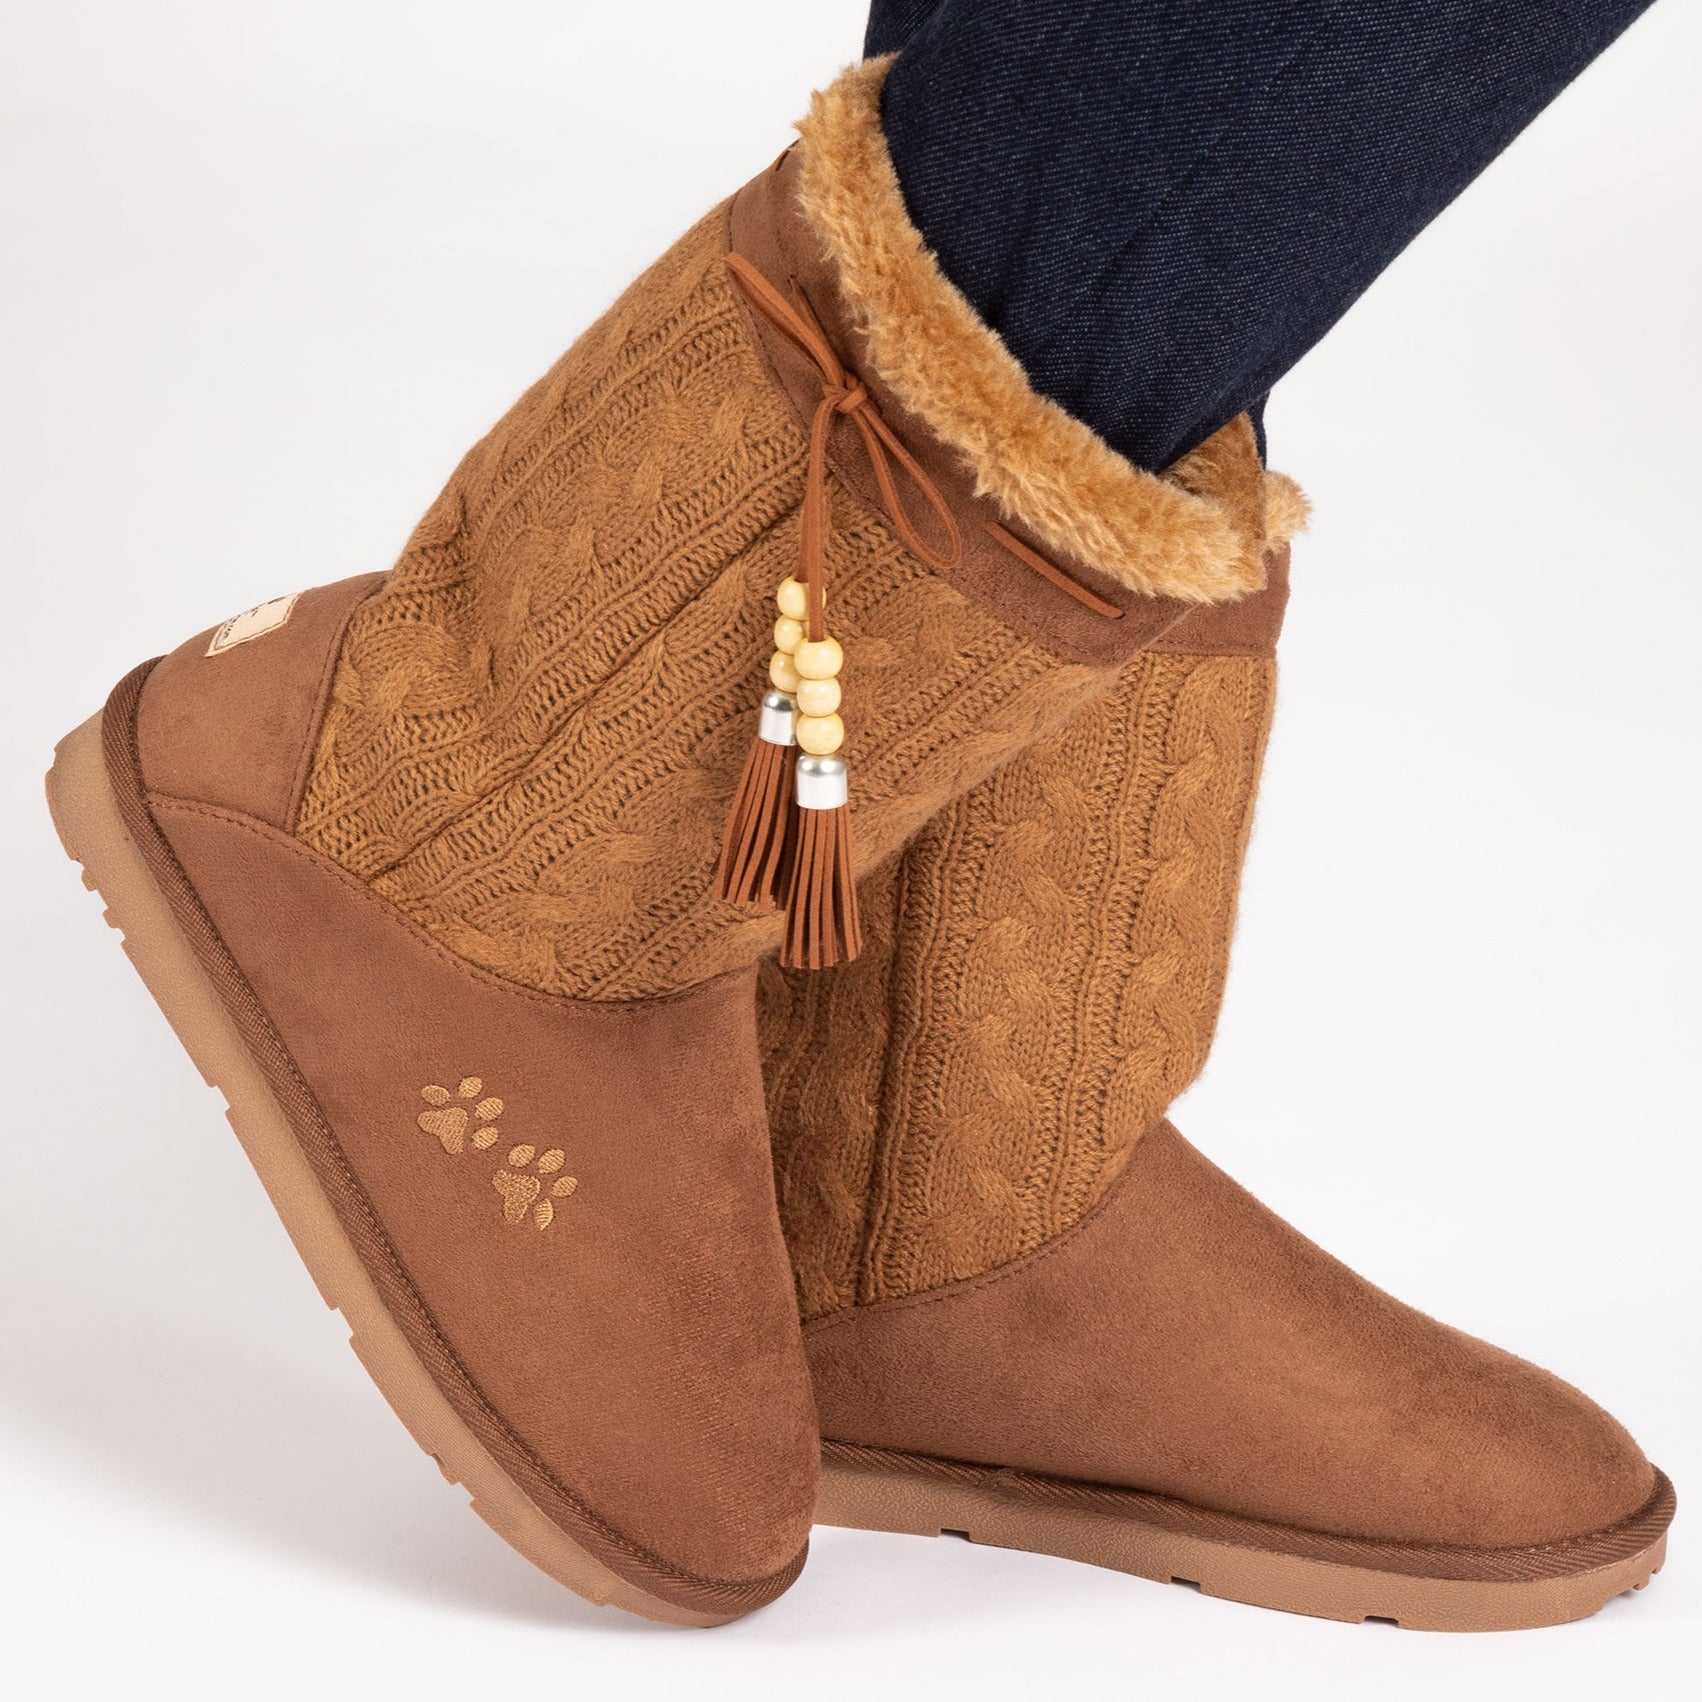 Paw Print Tall Knitted Boots With Beaded Tassels - Tan - 7